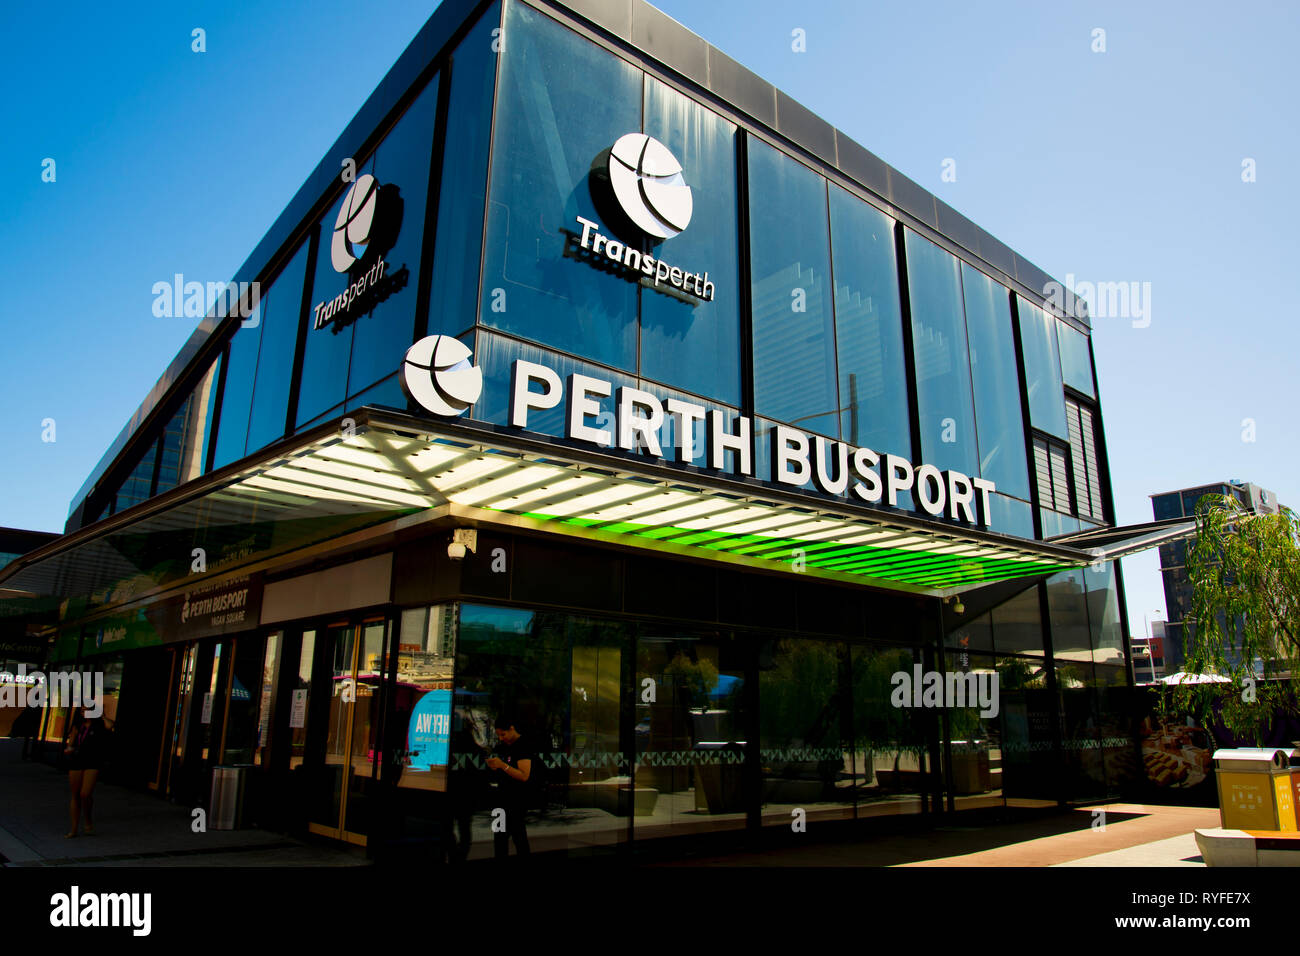 PERTH, AUSTRALIA - March 2, 2019: Perth Busport is an underground bus station officially opened in 2016 Stock Photo